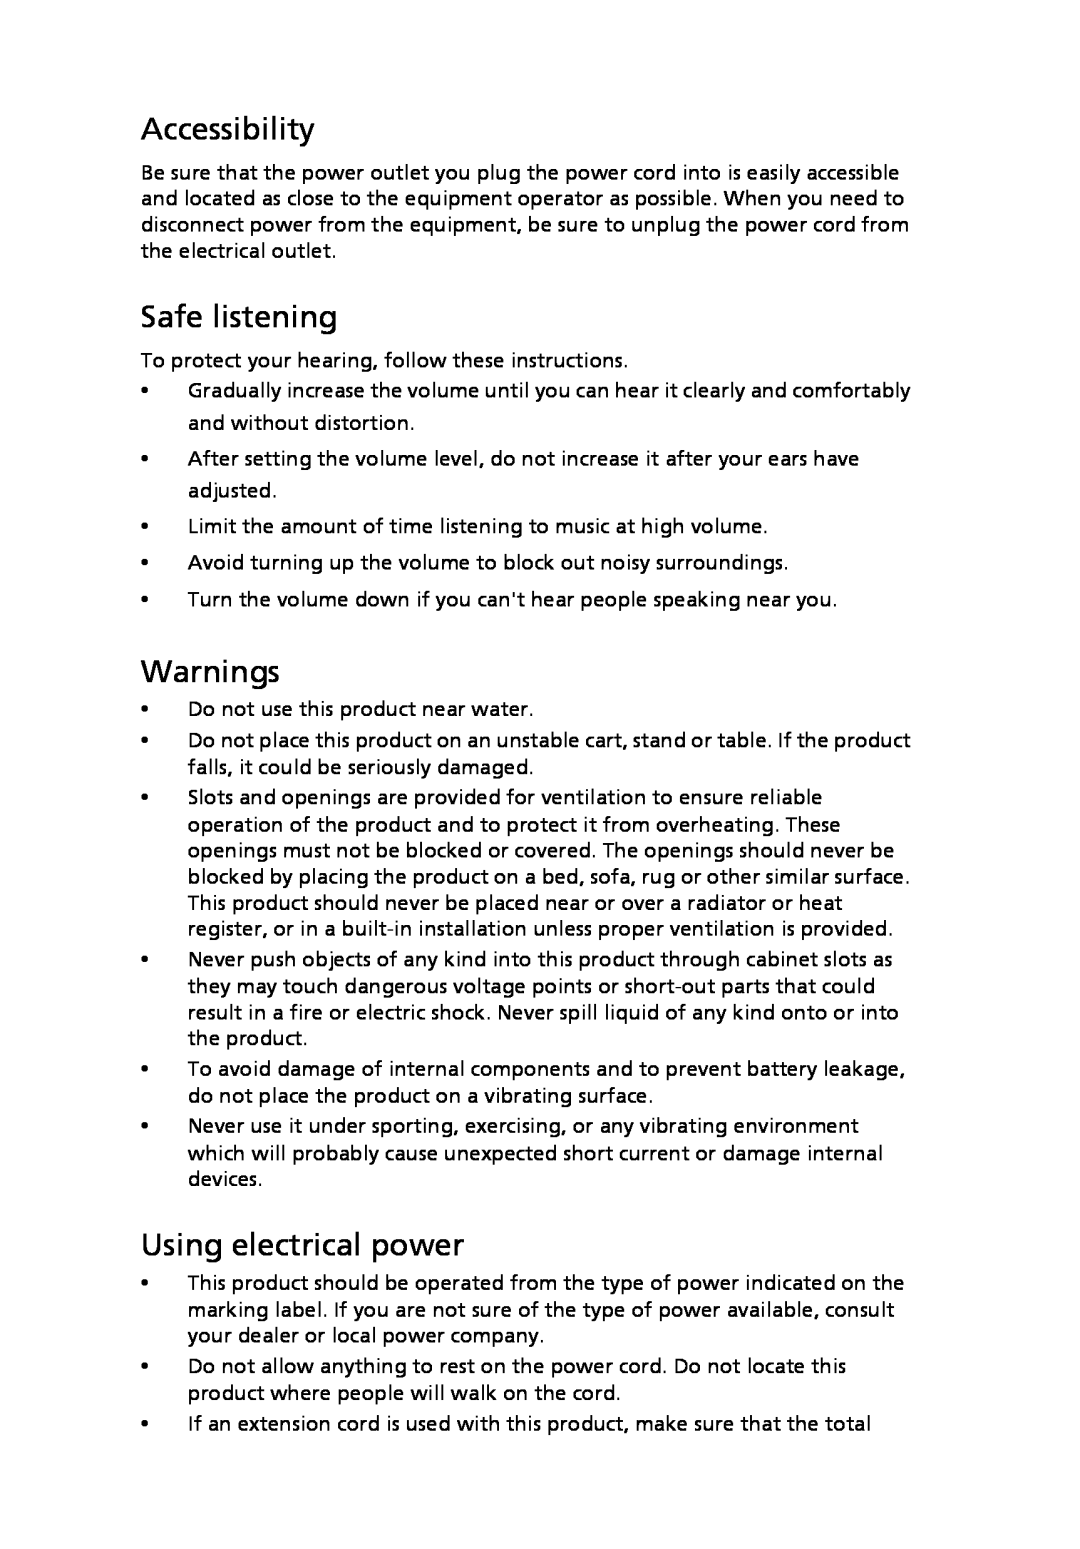 Acer X203H manual Accessibility, Safe listening, Warnings, Using electrical power 